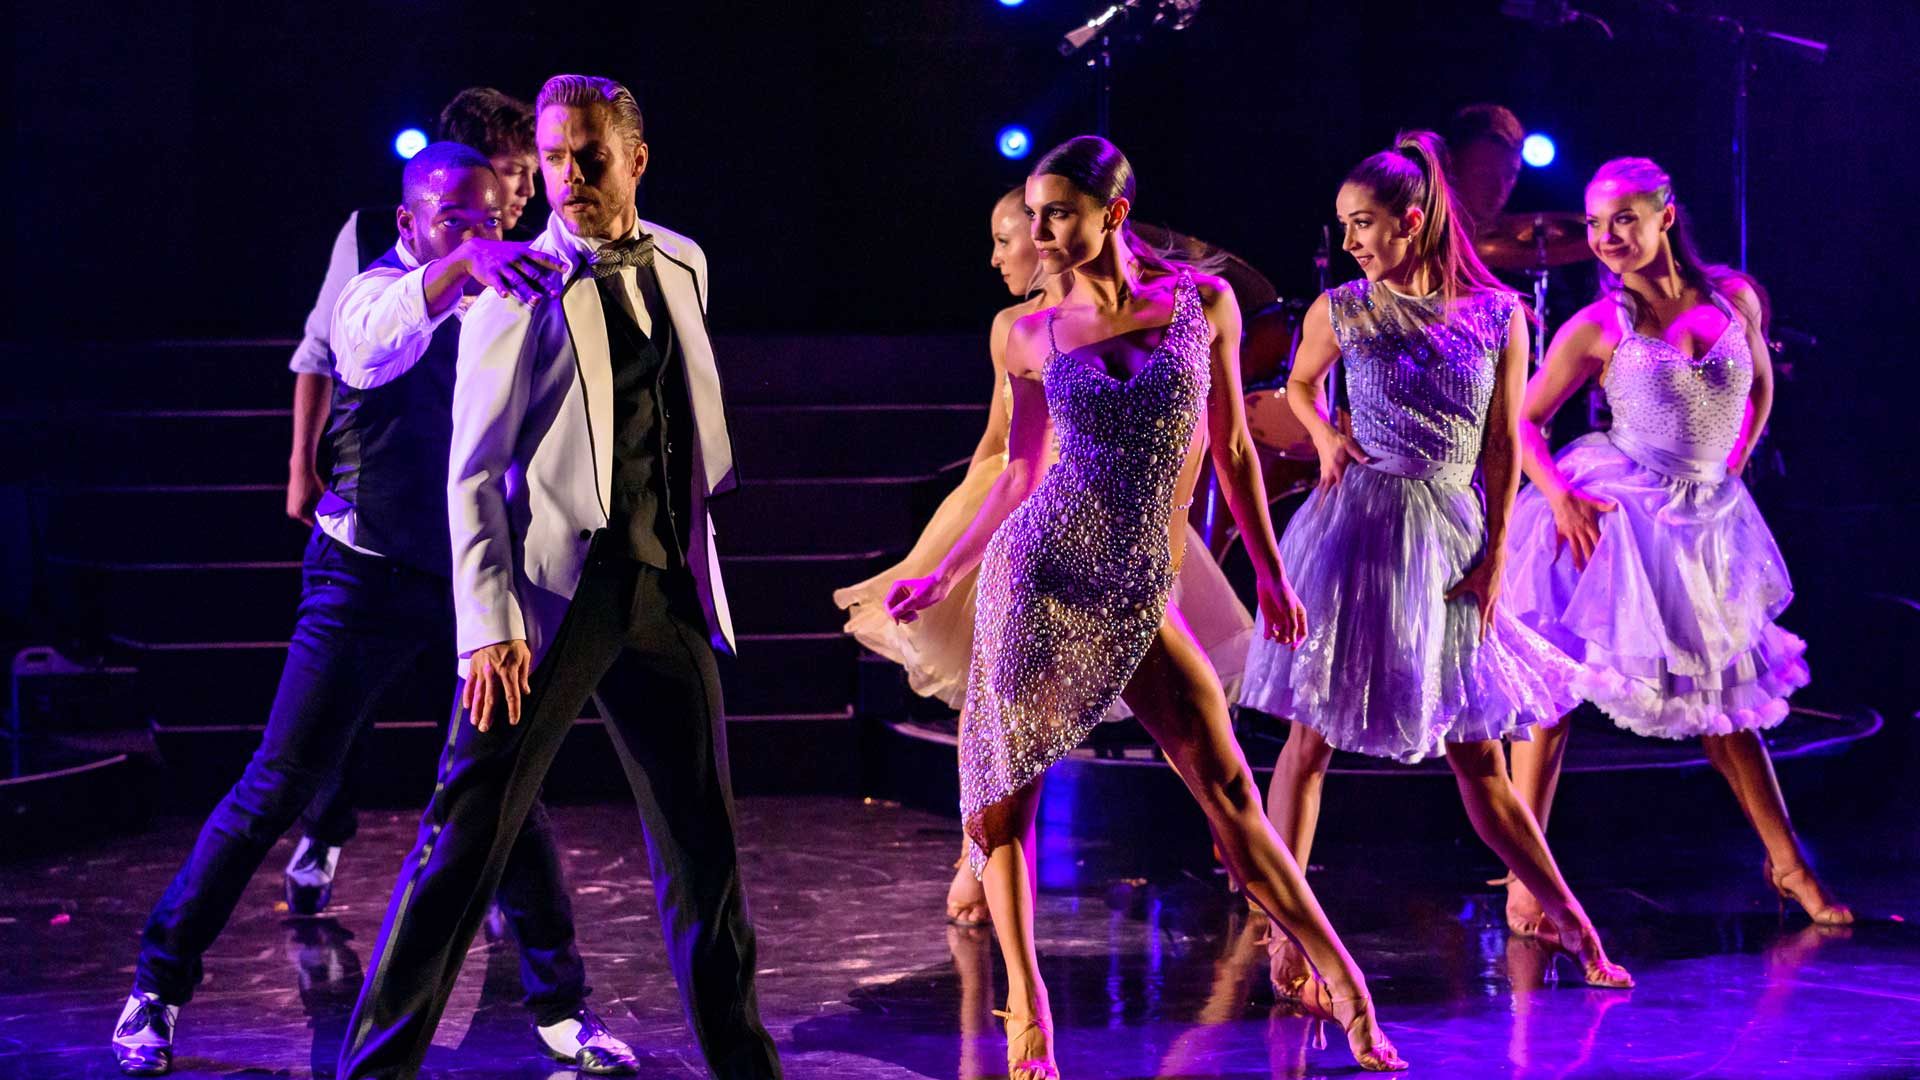 Tickets are available now for one of the hottest Las Vegas shows, Derek Hough: No Limit.